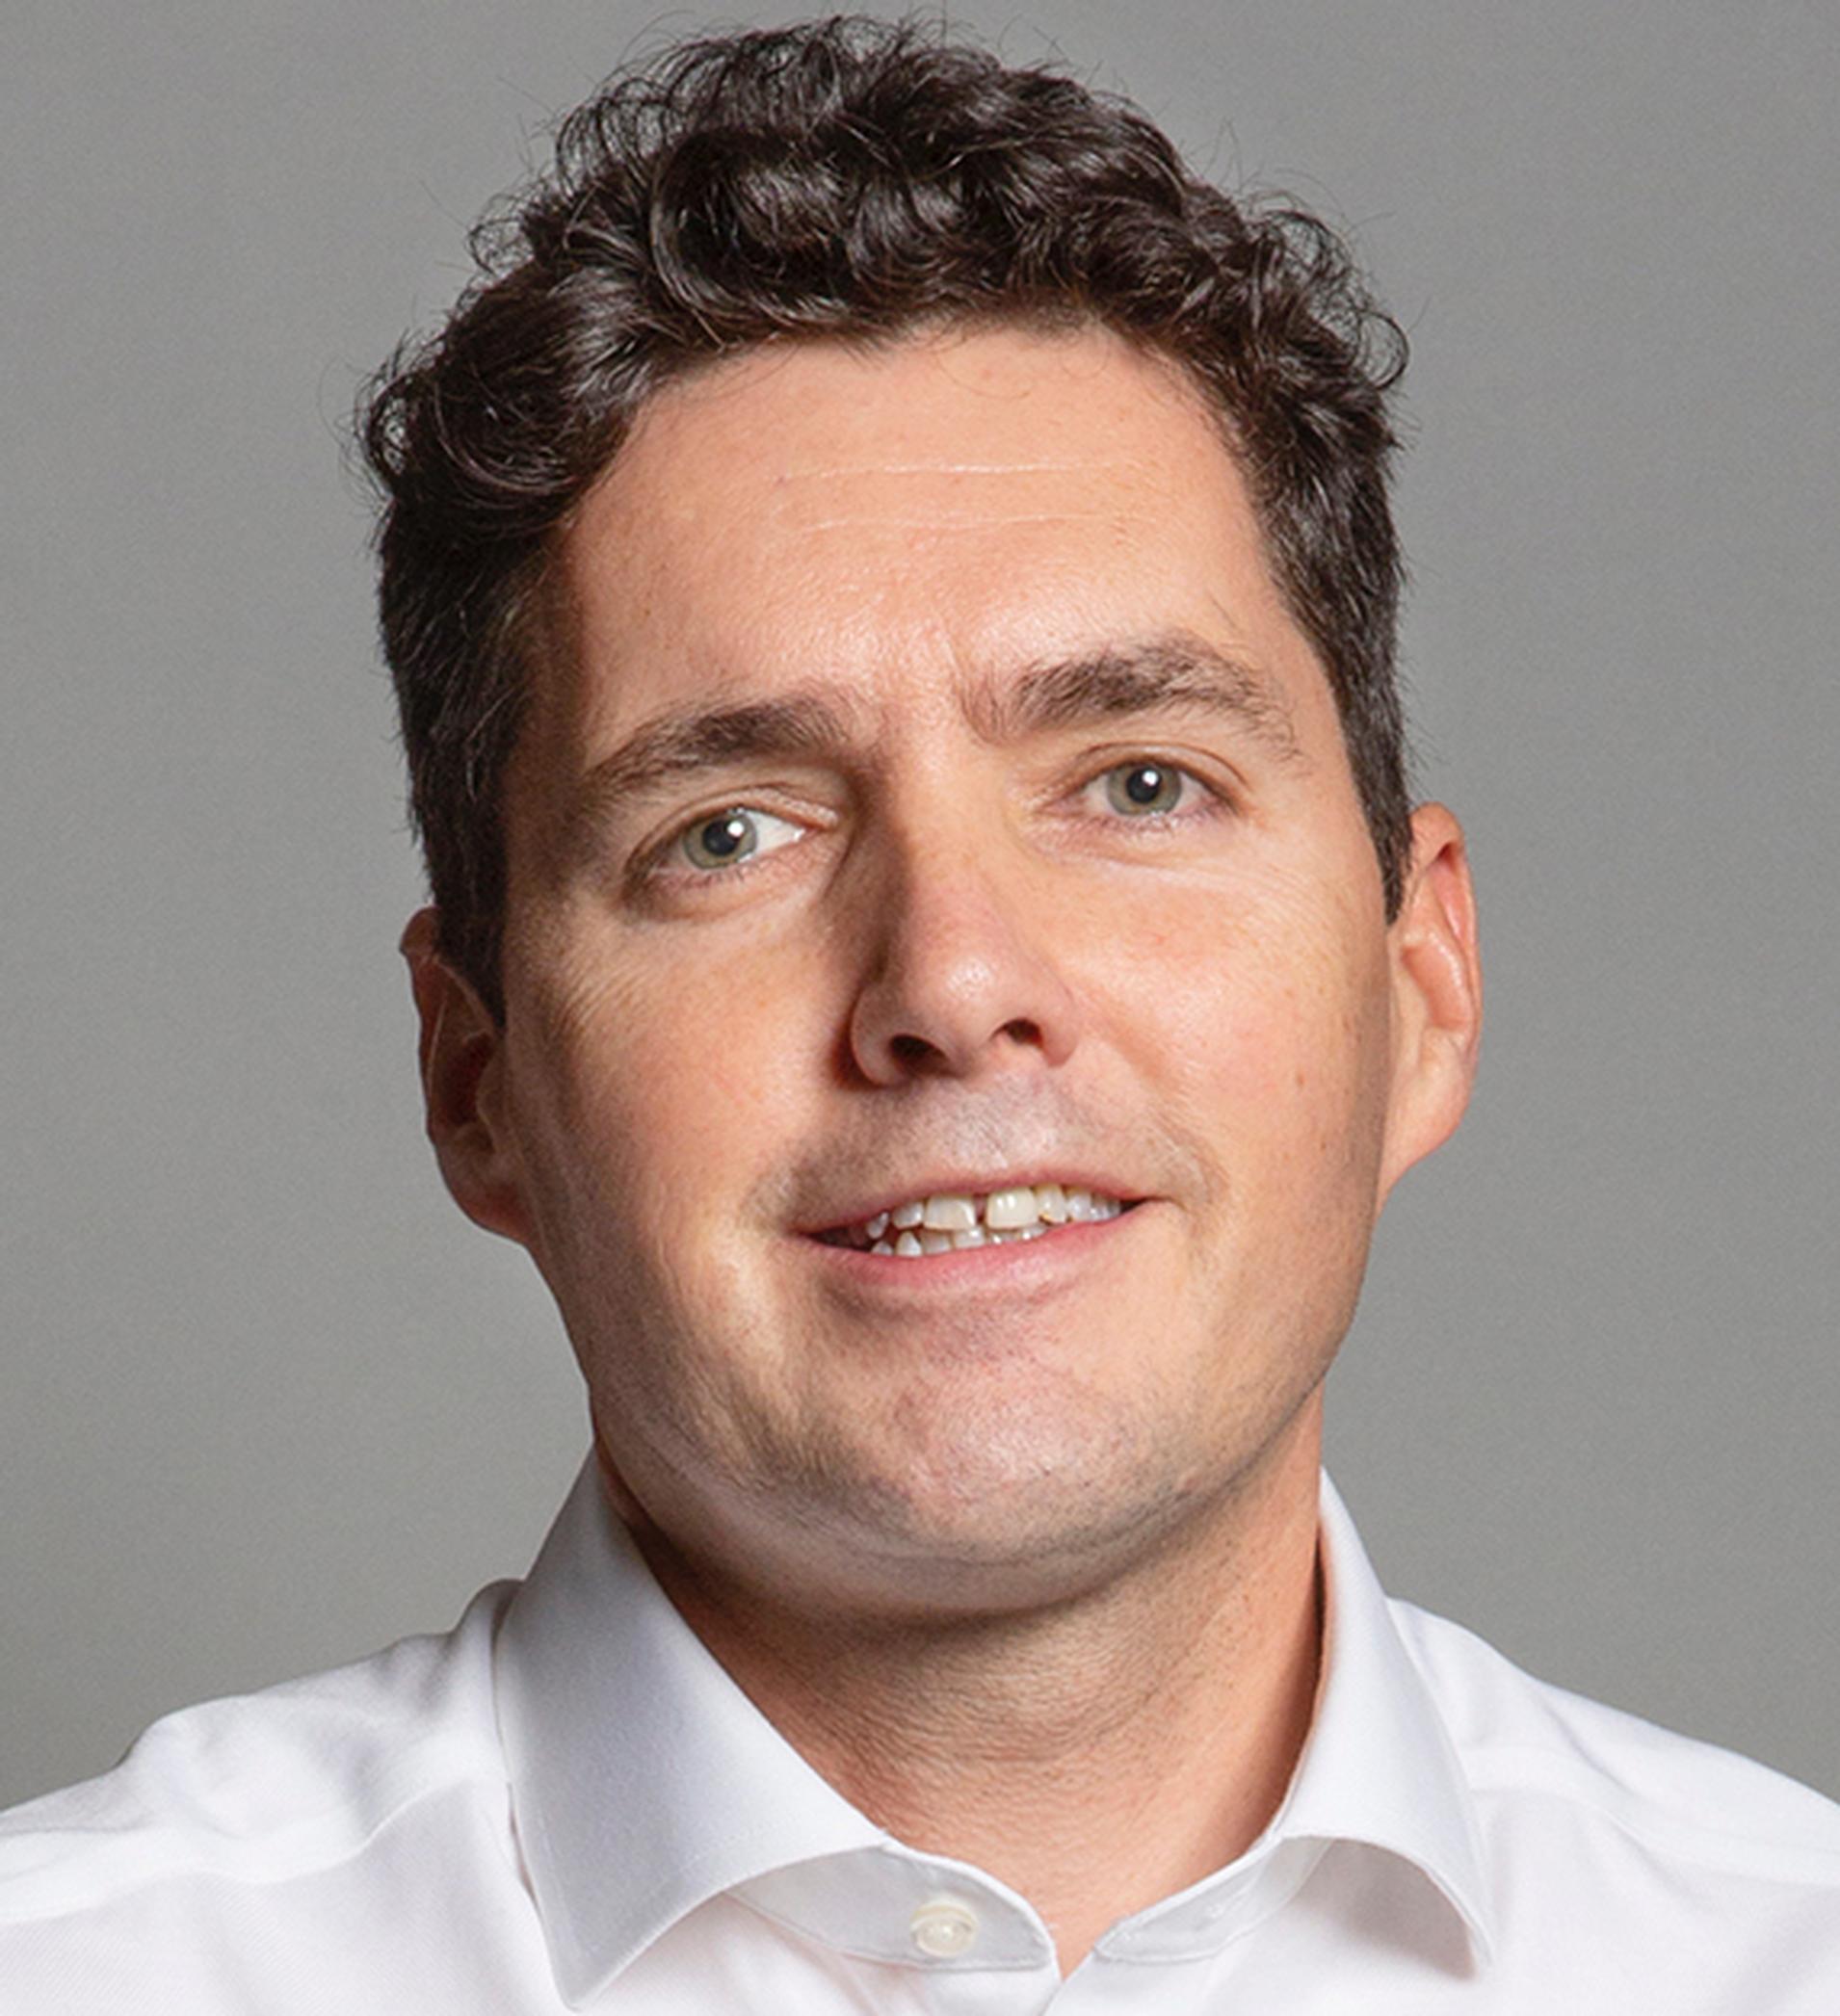 Huw Merriman: The scope and costs of Phase 1 will now be reassessed following the decision not to proceed beyond the Midlands